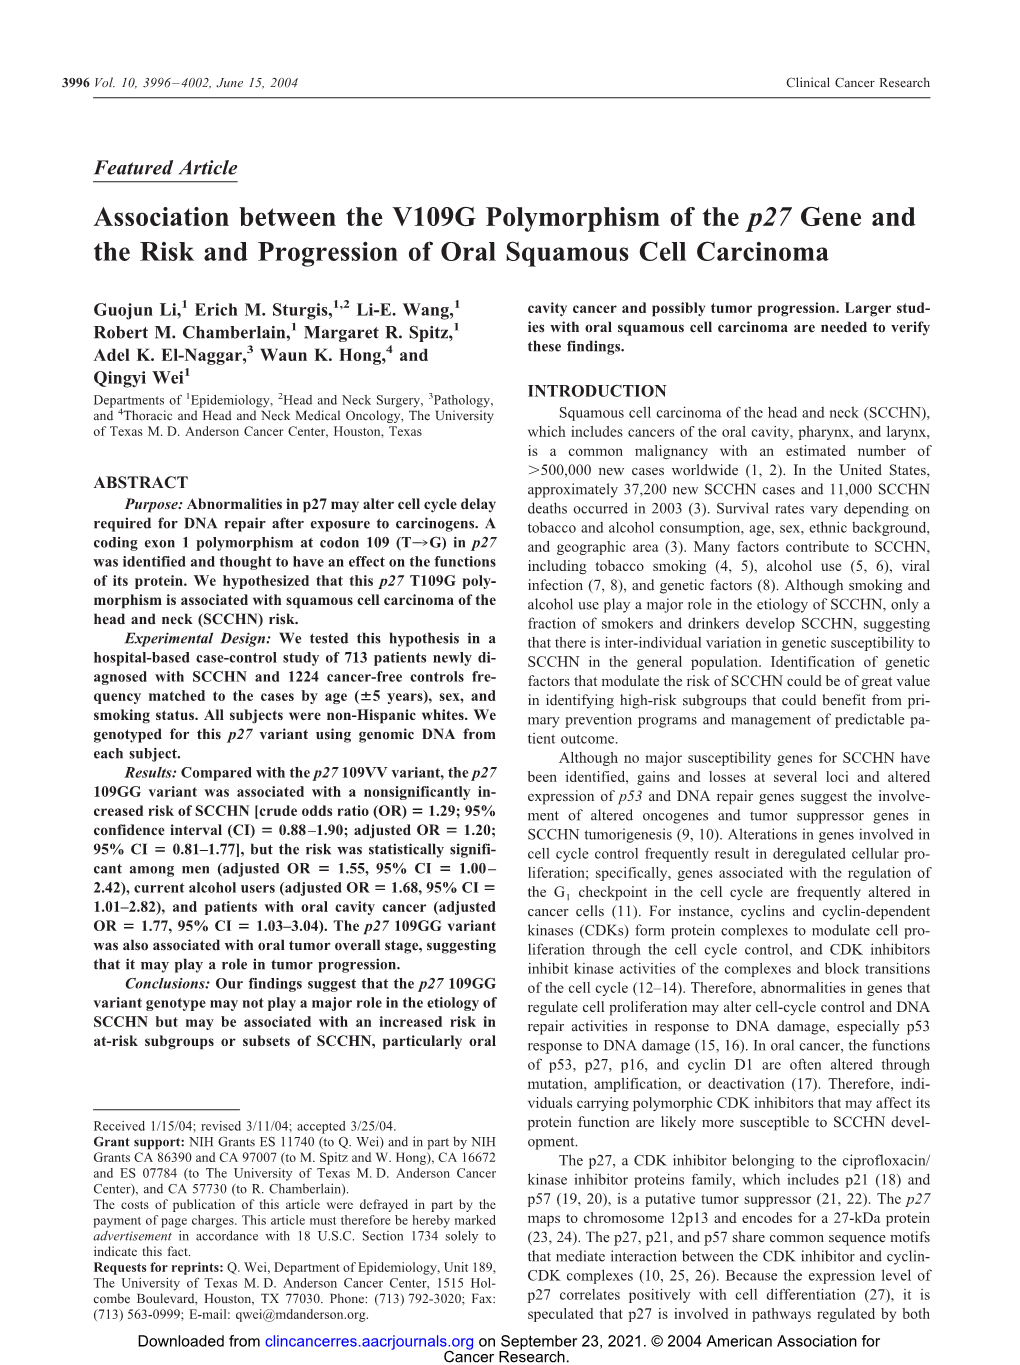 Association Between the V109G Polymorphism of the P27 Gene and the Risk and Progression of Oral Squamous Cell Carcinoma